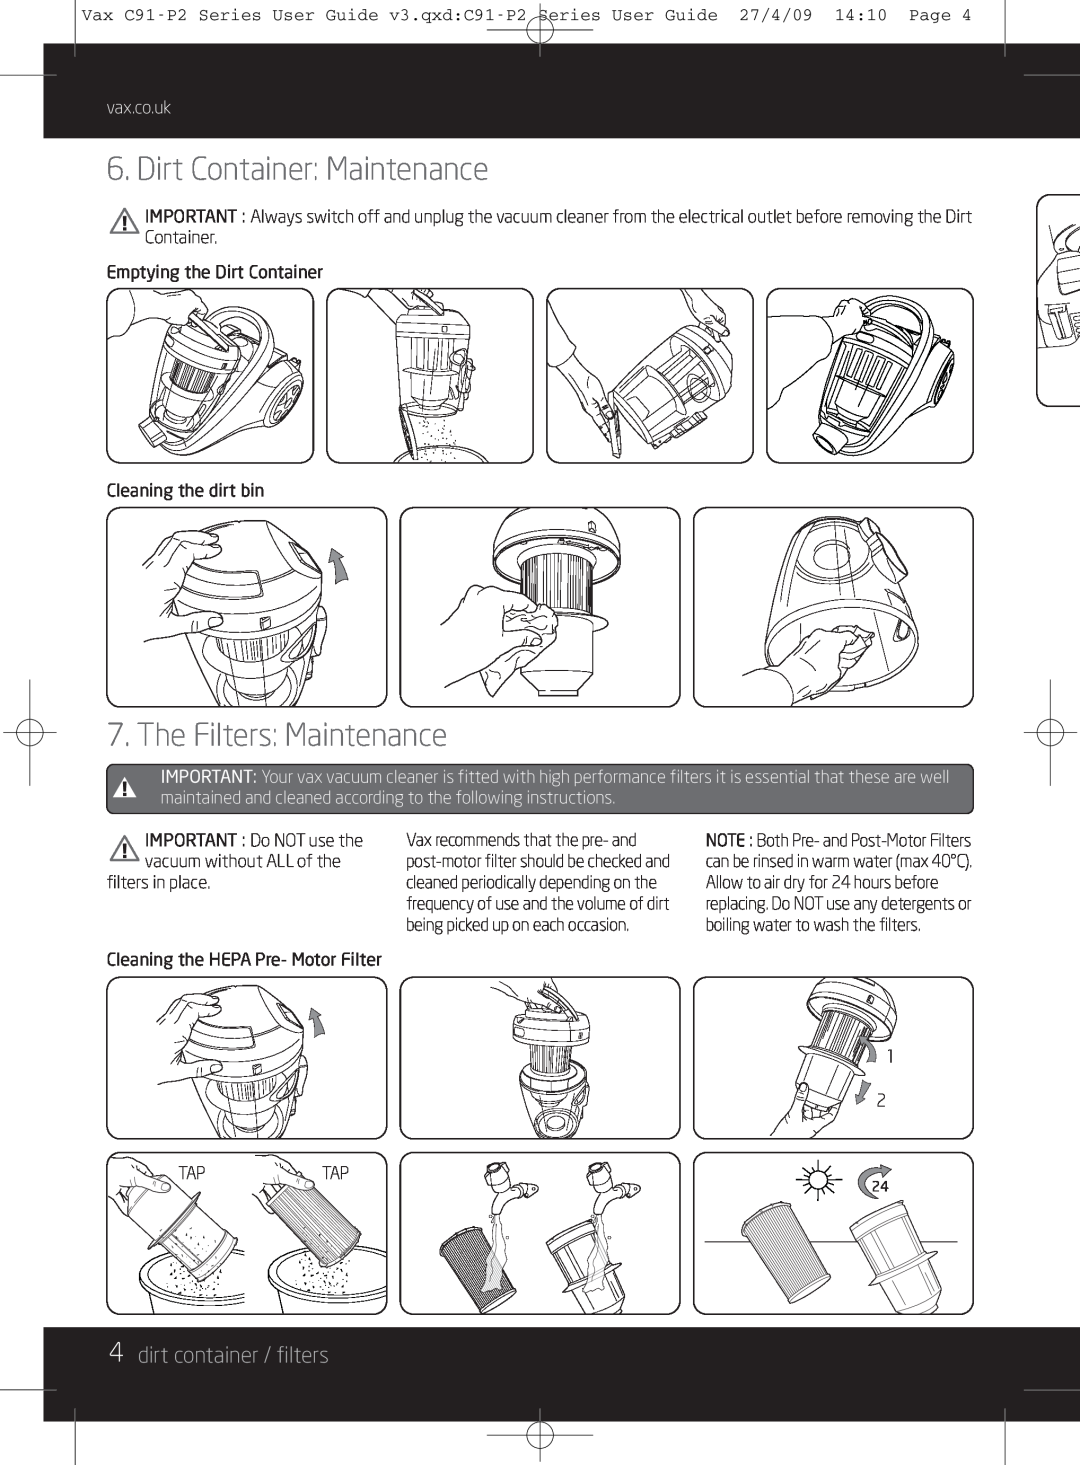 Vax C91-P2 instruction manual Dirt Container Maintenance, The Filters Maintenance, 4dirt container / filters, vax.co.uk 